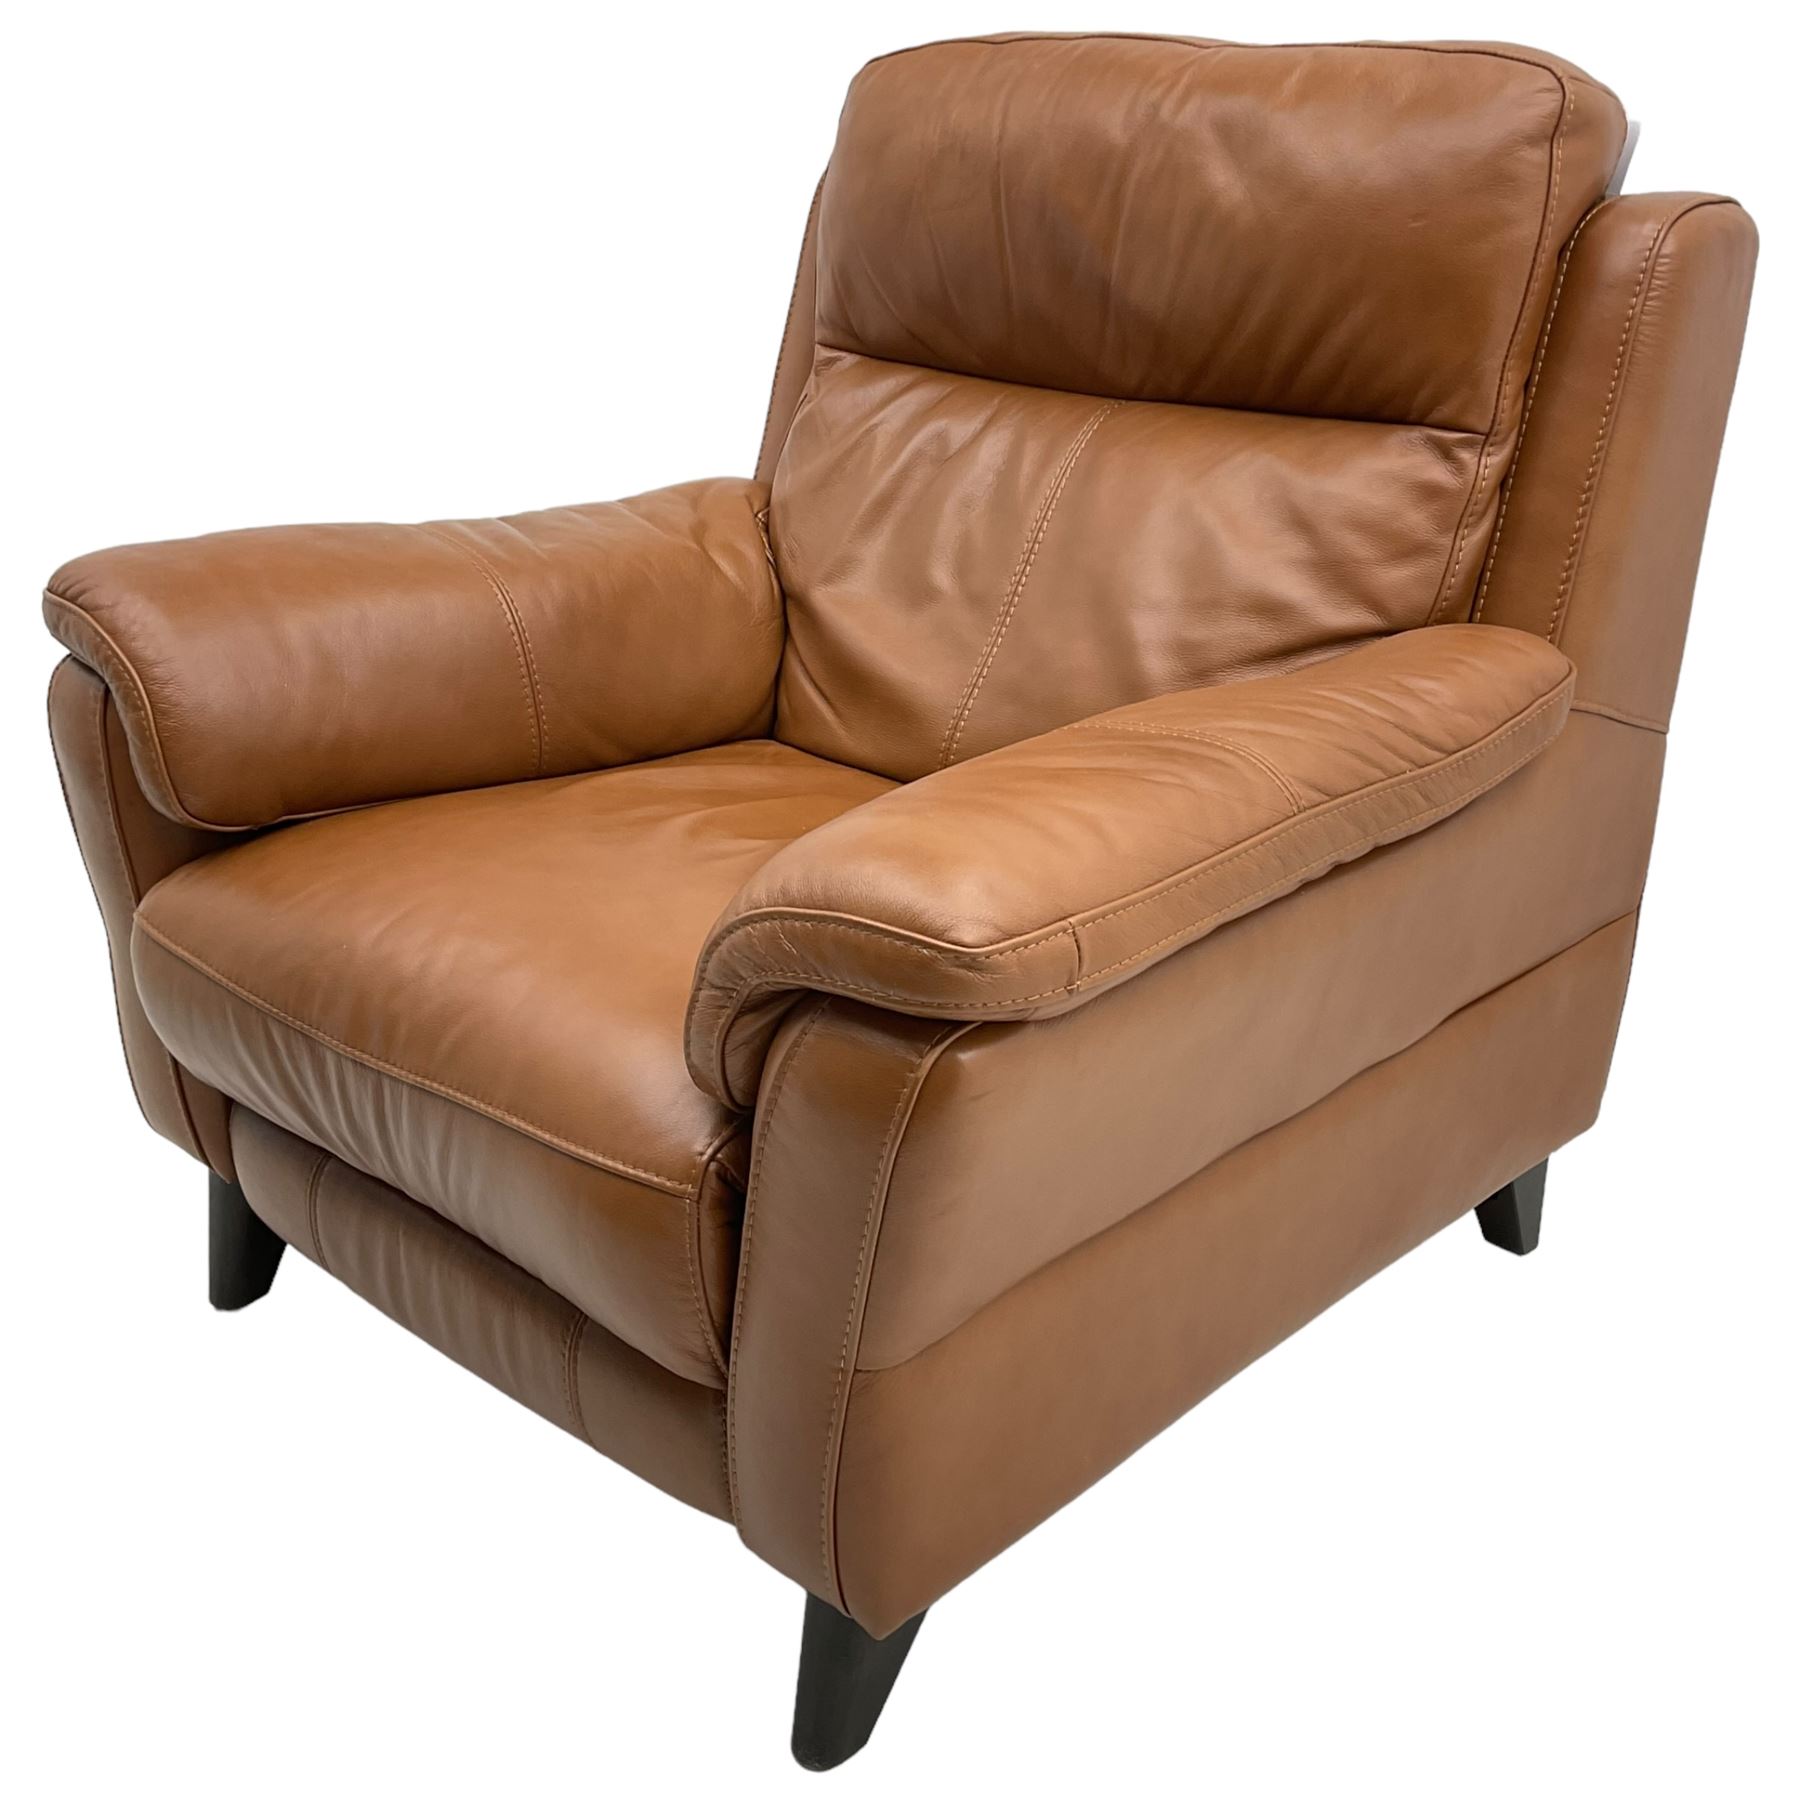 Electric reclining armchair - Image 2 of 6